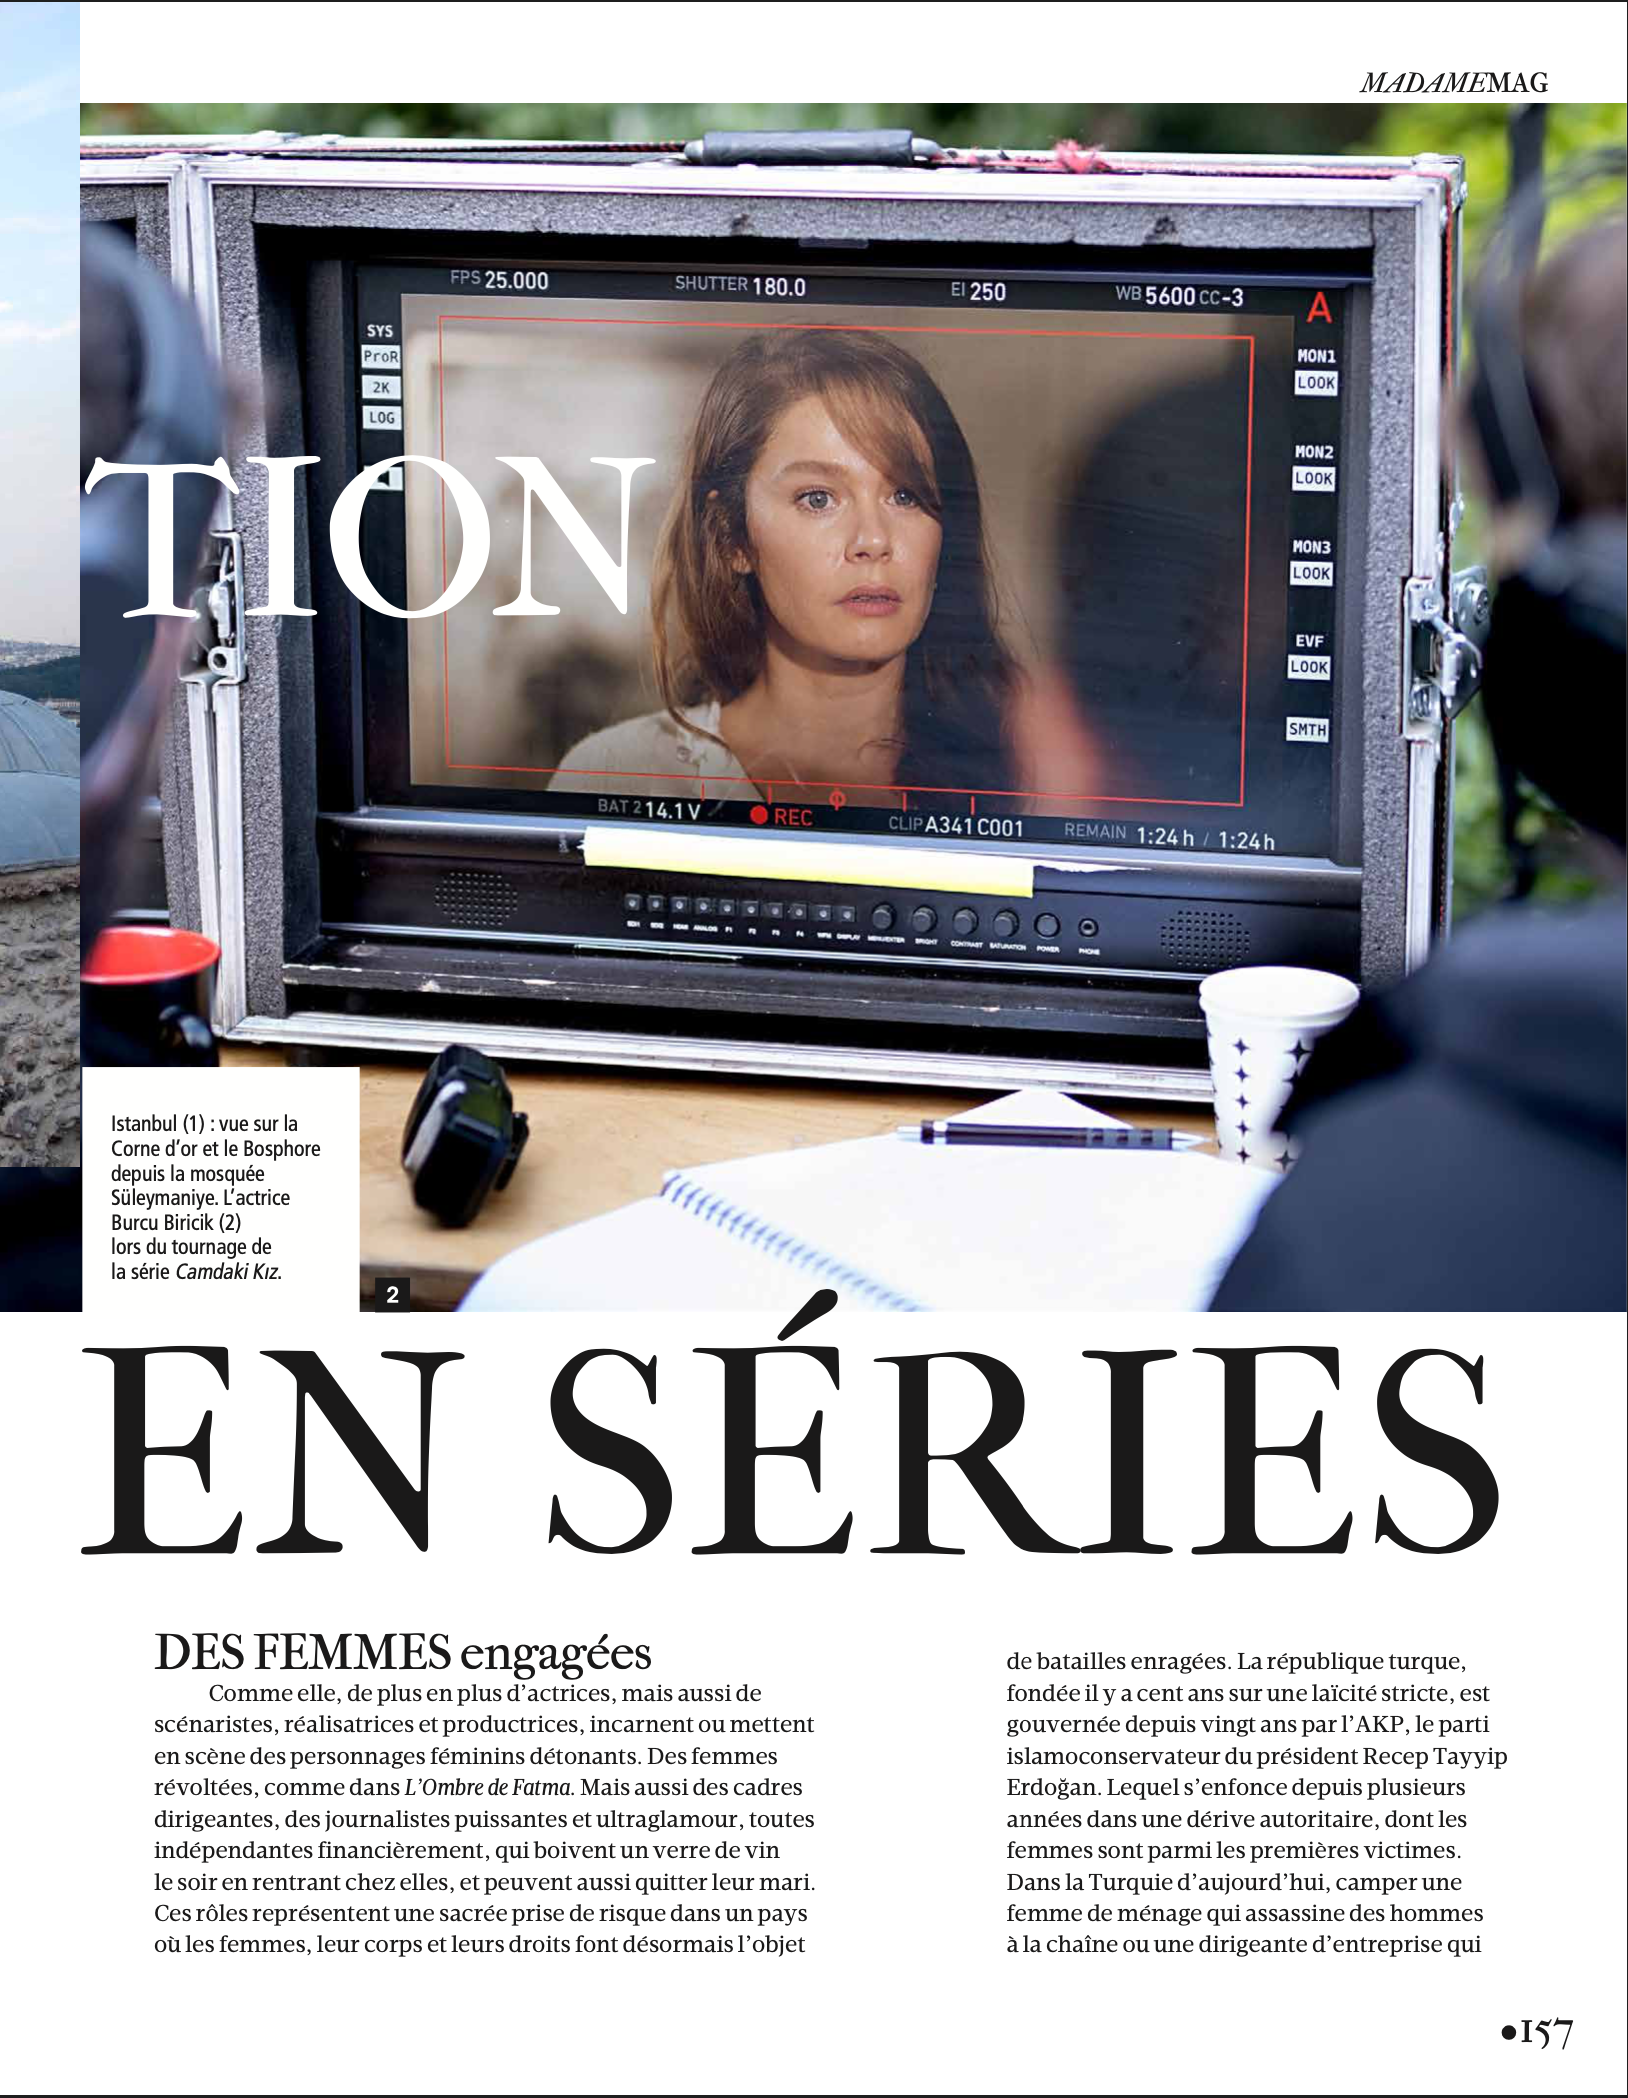 Image from Publications - Madame Figaro - 6 pages